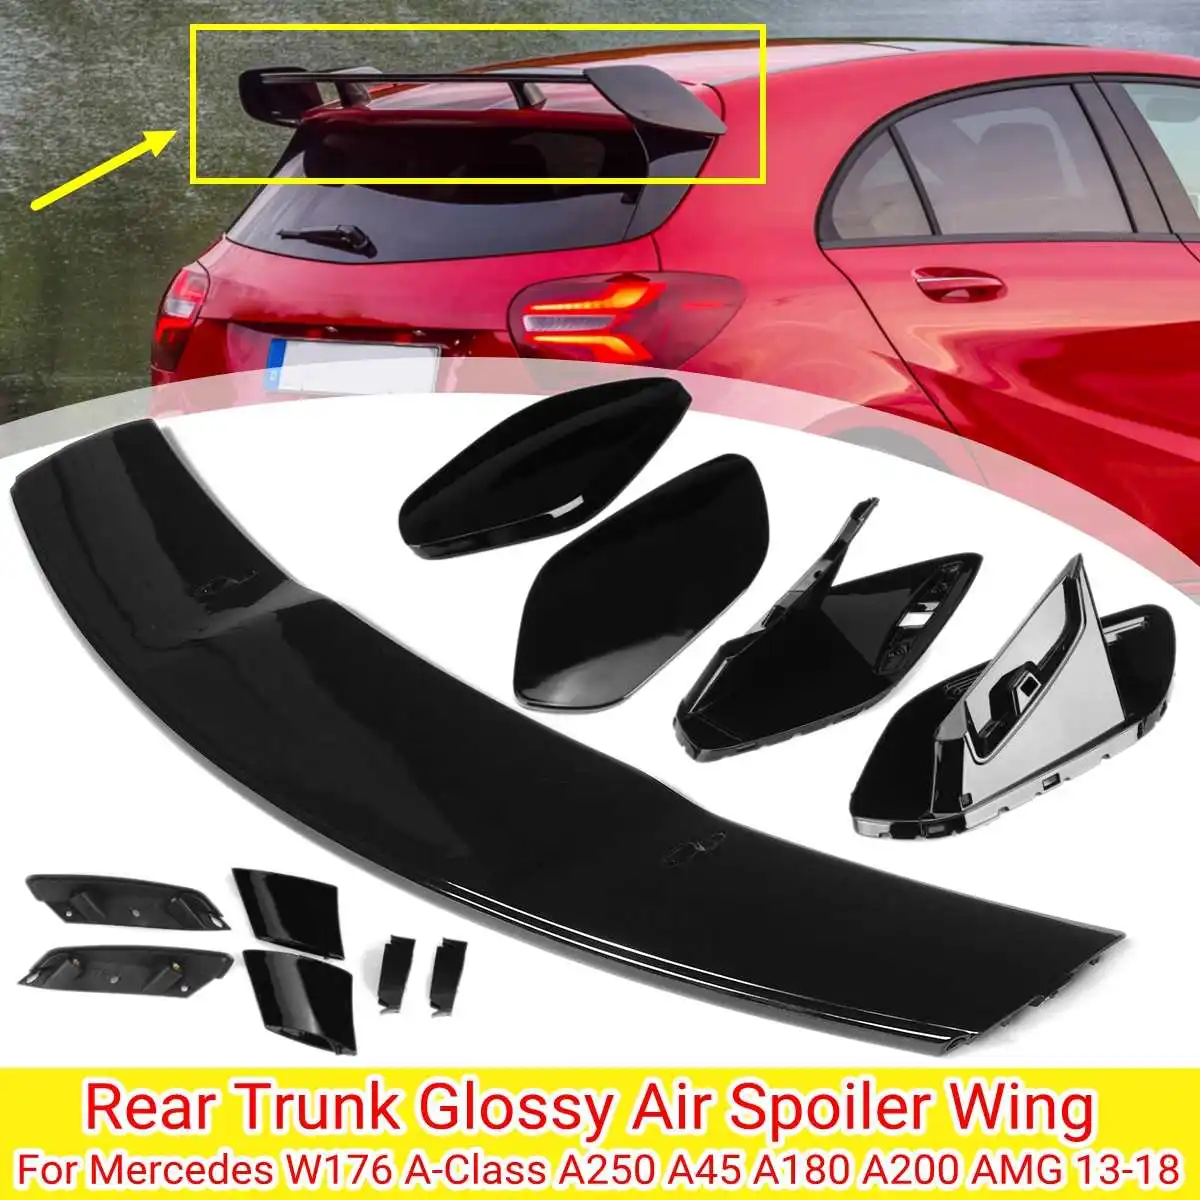 

Rear Trunk Glossy Painted Air Splitter Spoiler For Mercedes Benz A Class W177 W176 A35 A180 A200 A220 A260 AMG 2013-2018 2019+